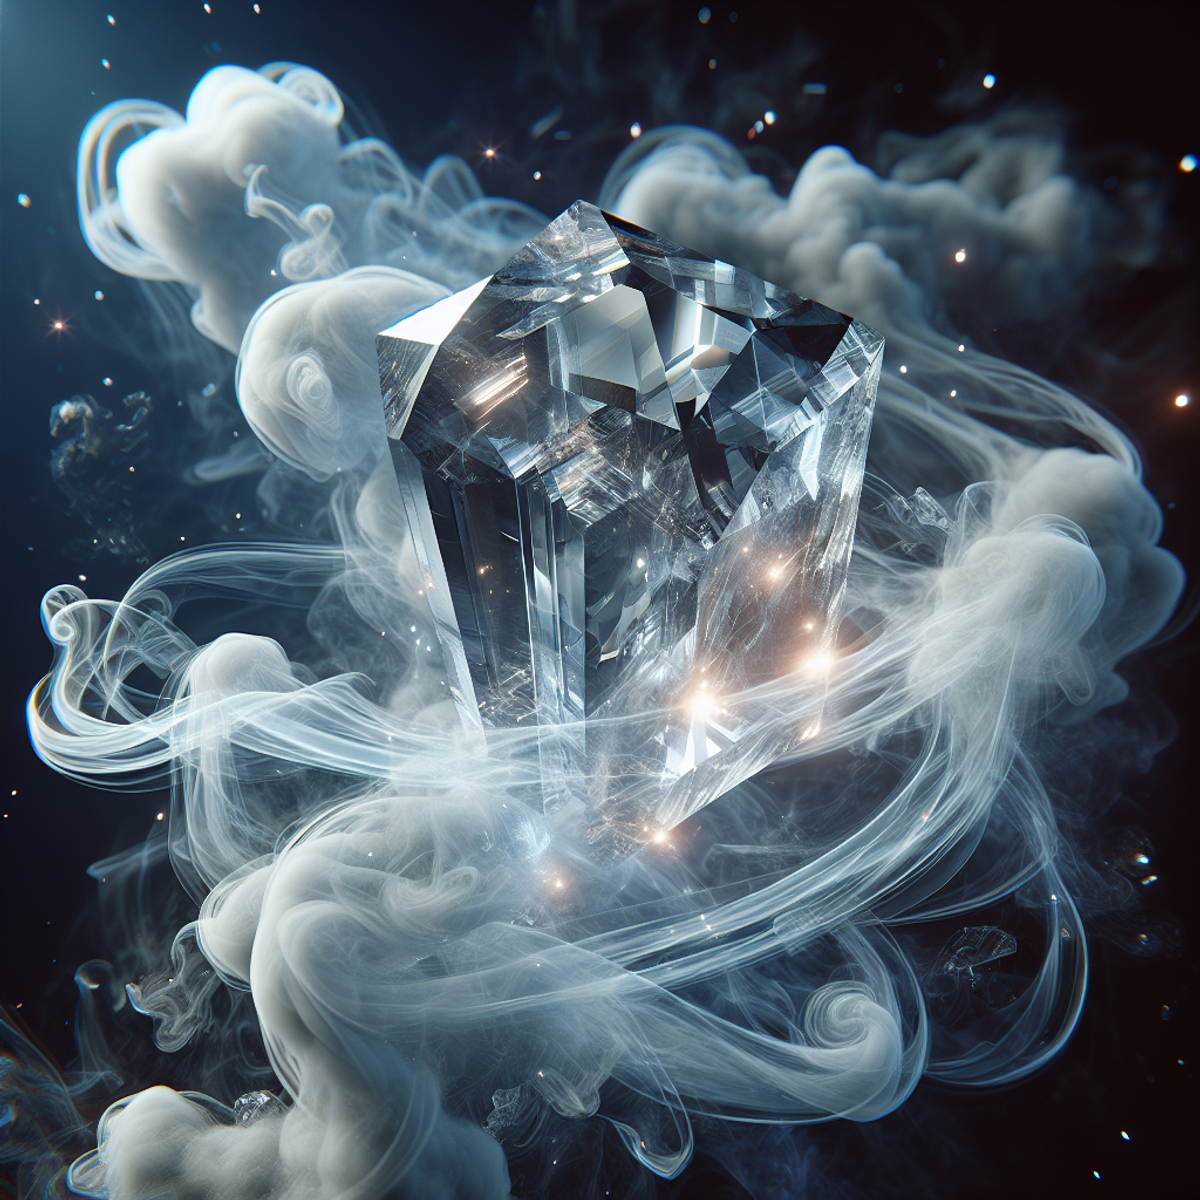 A transparent crystal being cleansed in tendrils of smoke.